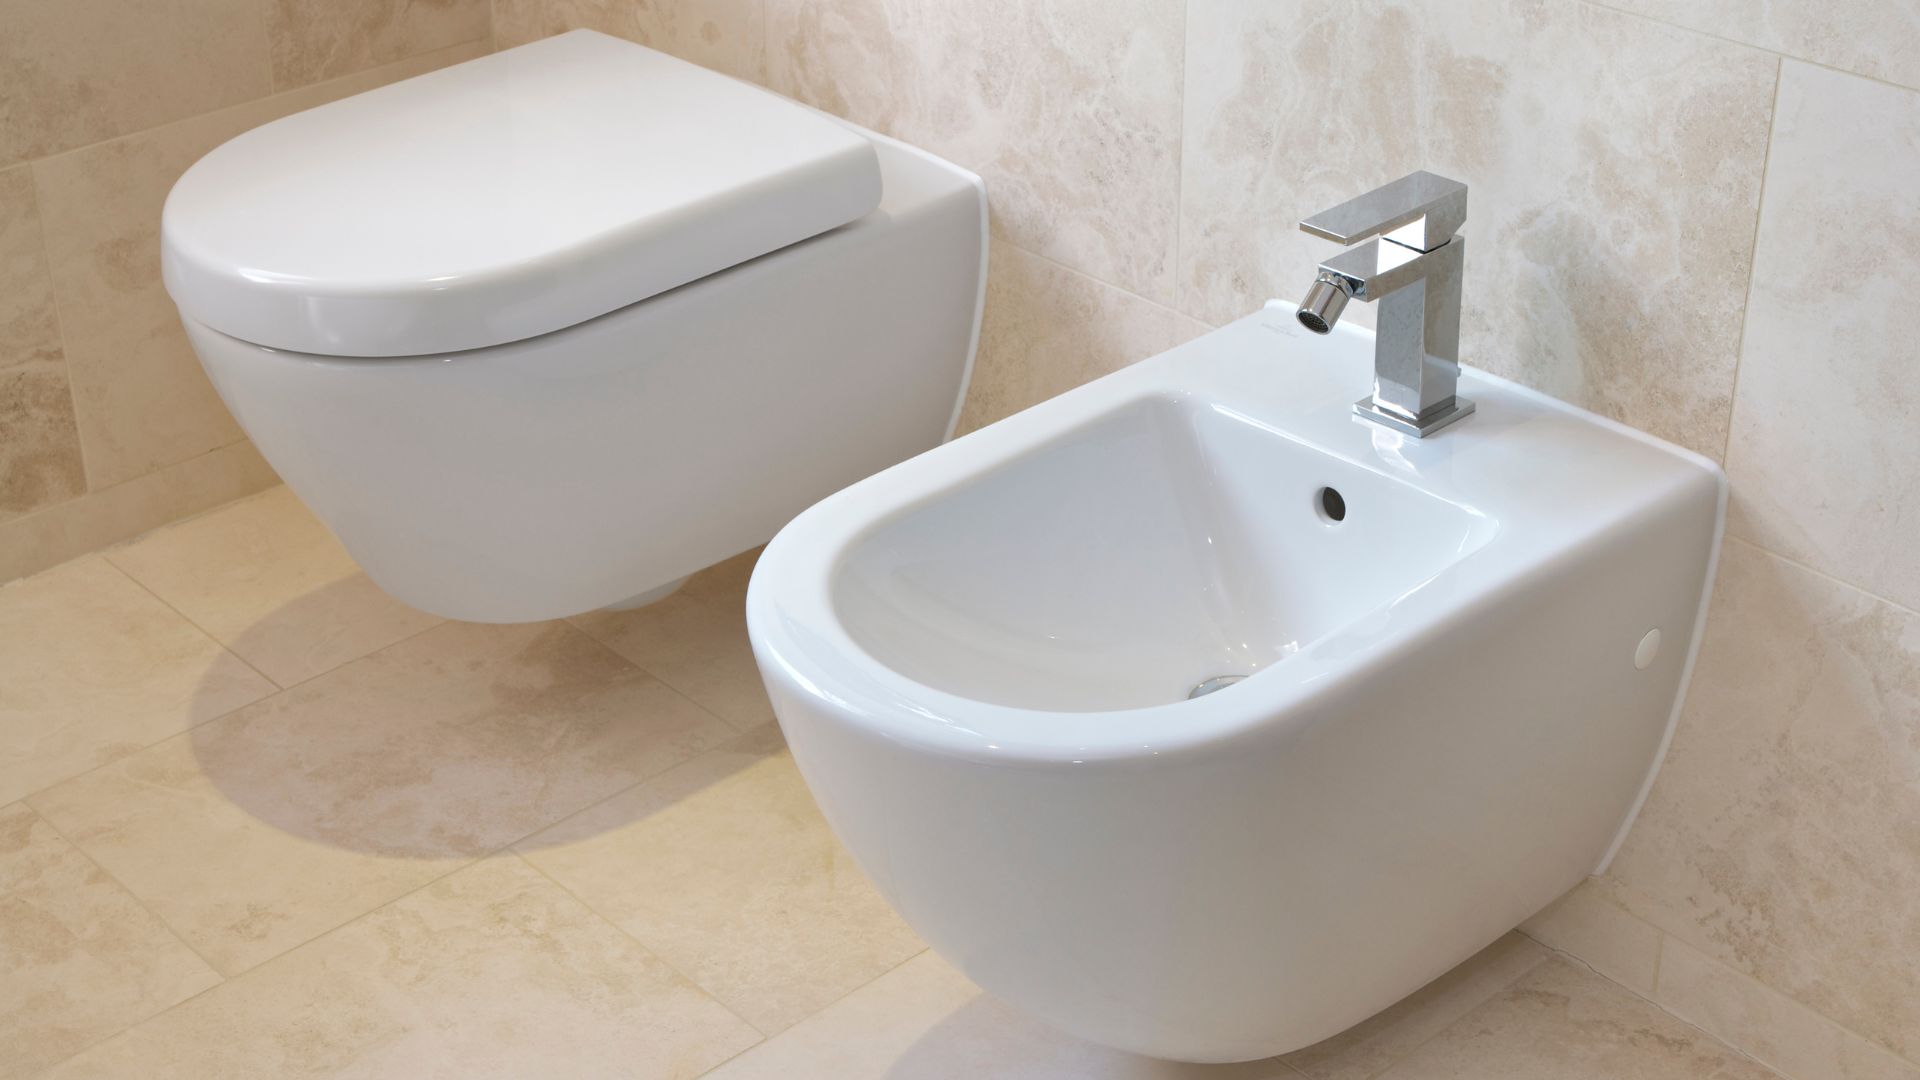 For all your bidet requirements, get in touch with CAN Plumbing and Drainage, where skilled plumbers are ready to assist you.